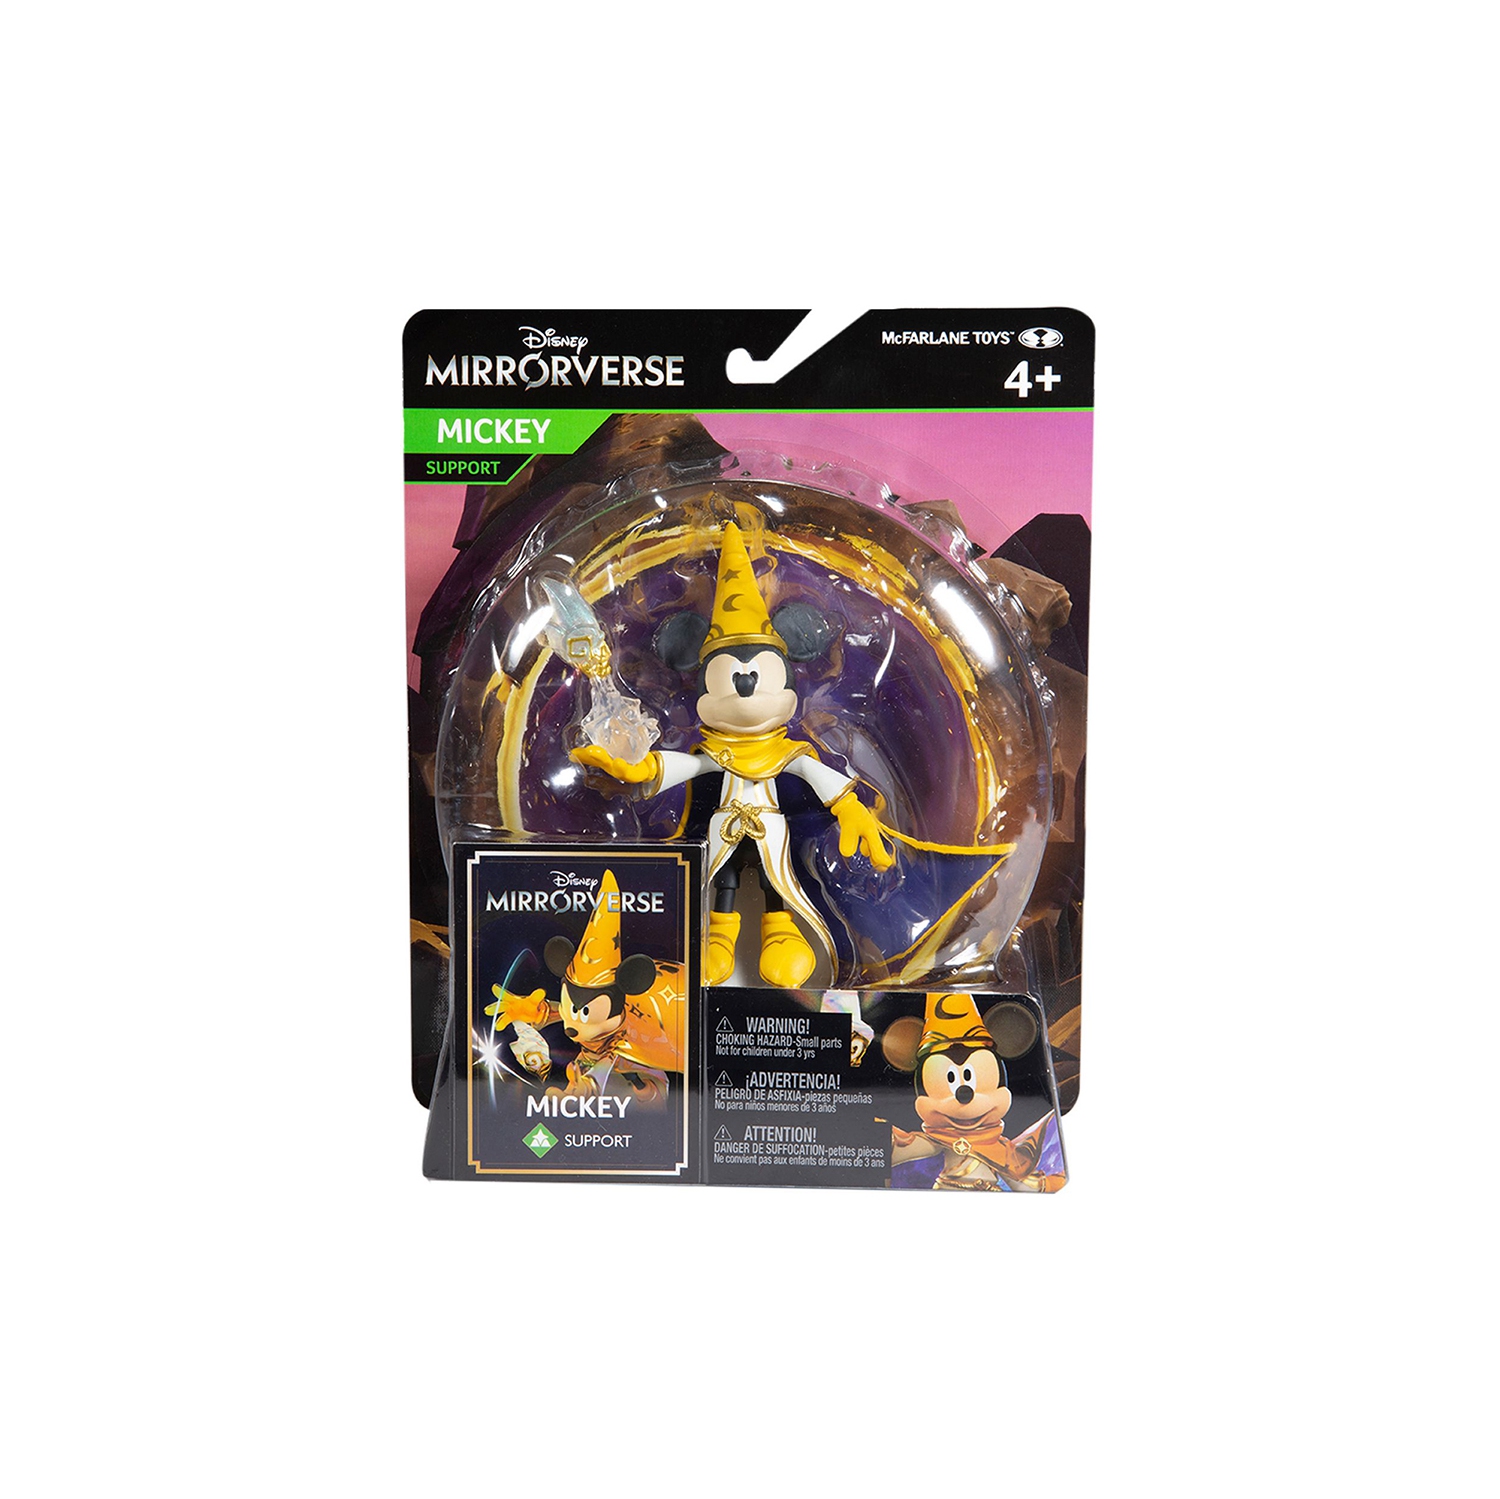 Disney Mirrorverse 5 Inch Action Figure Basic Wave 1 - Mickey Mouse